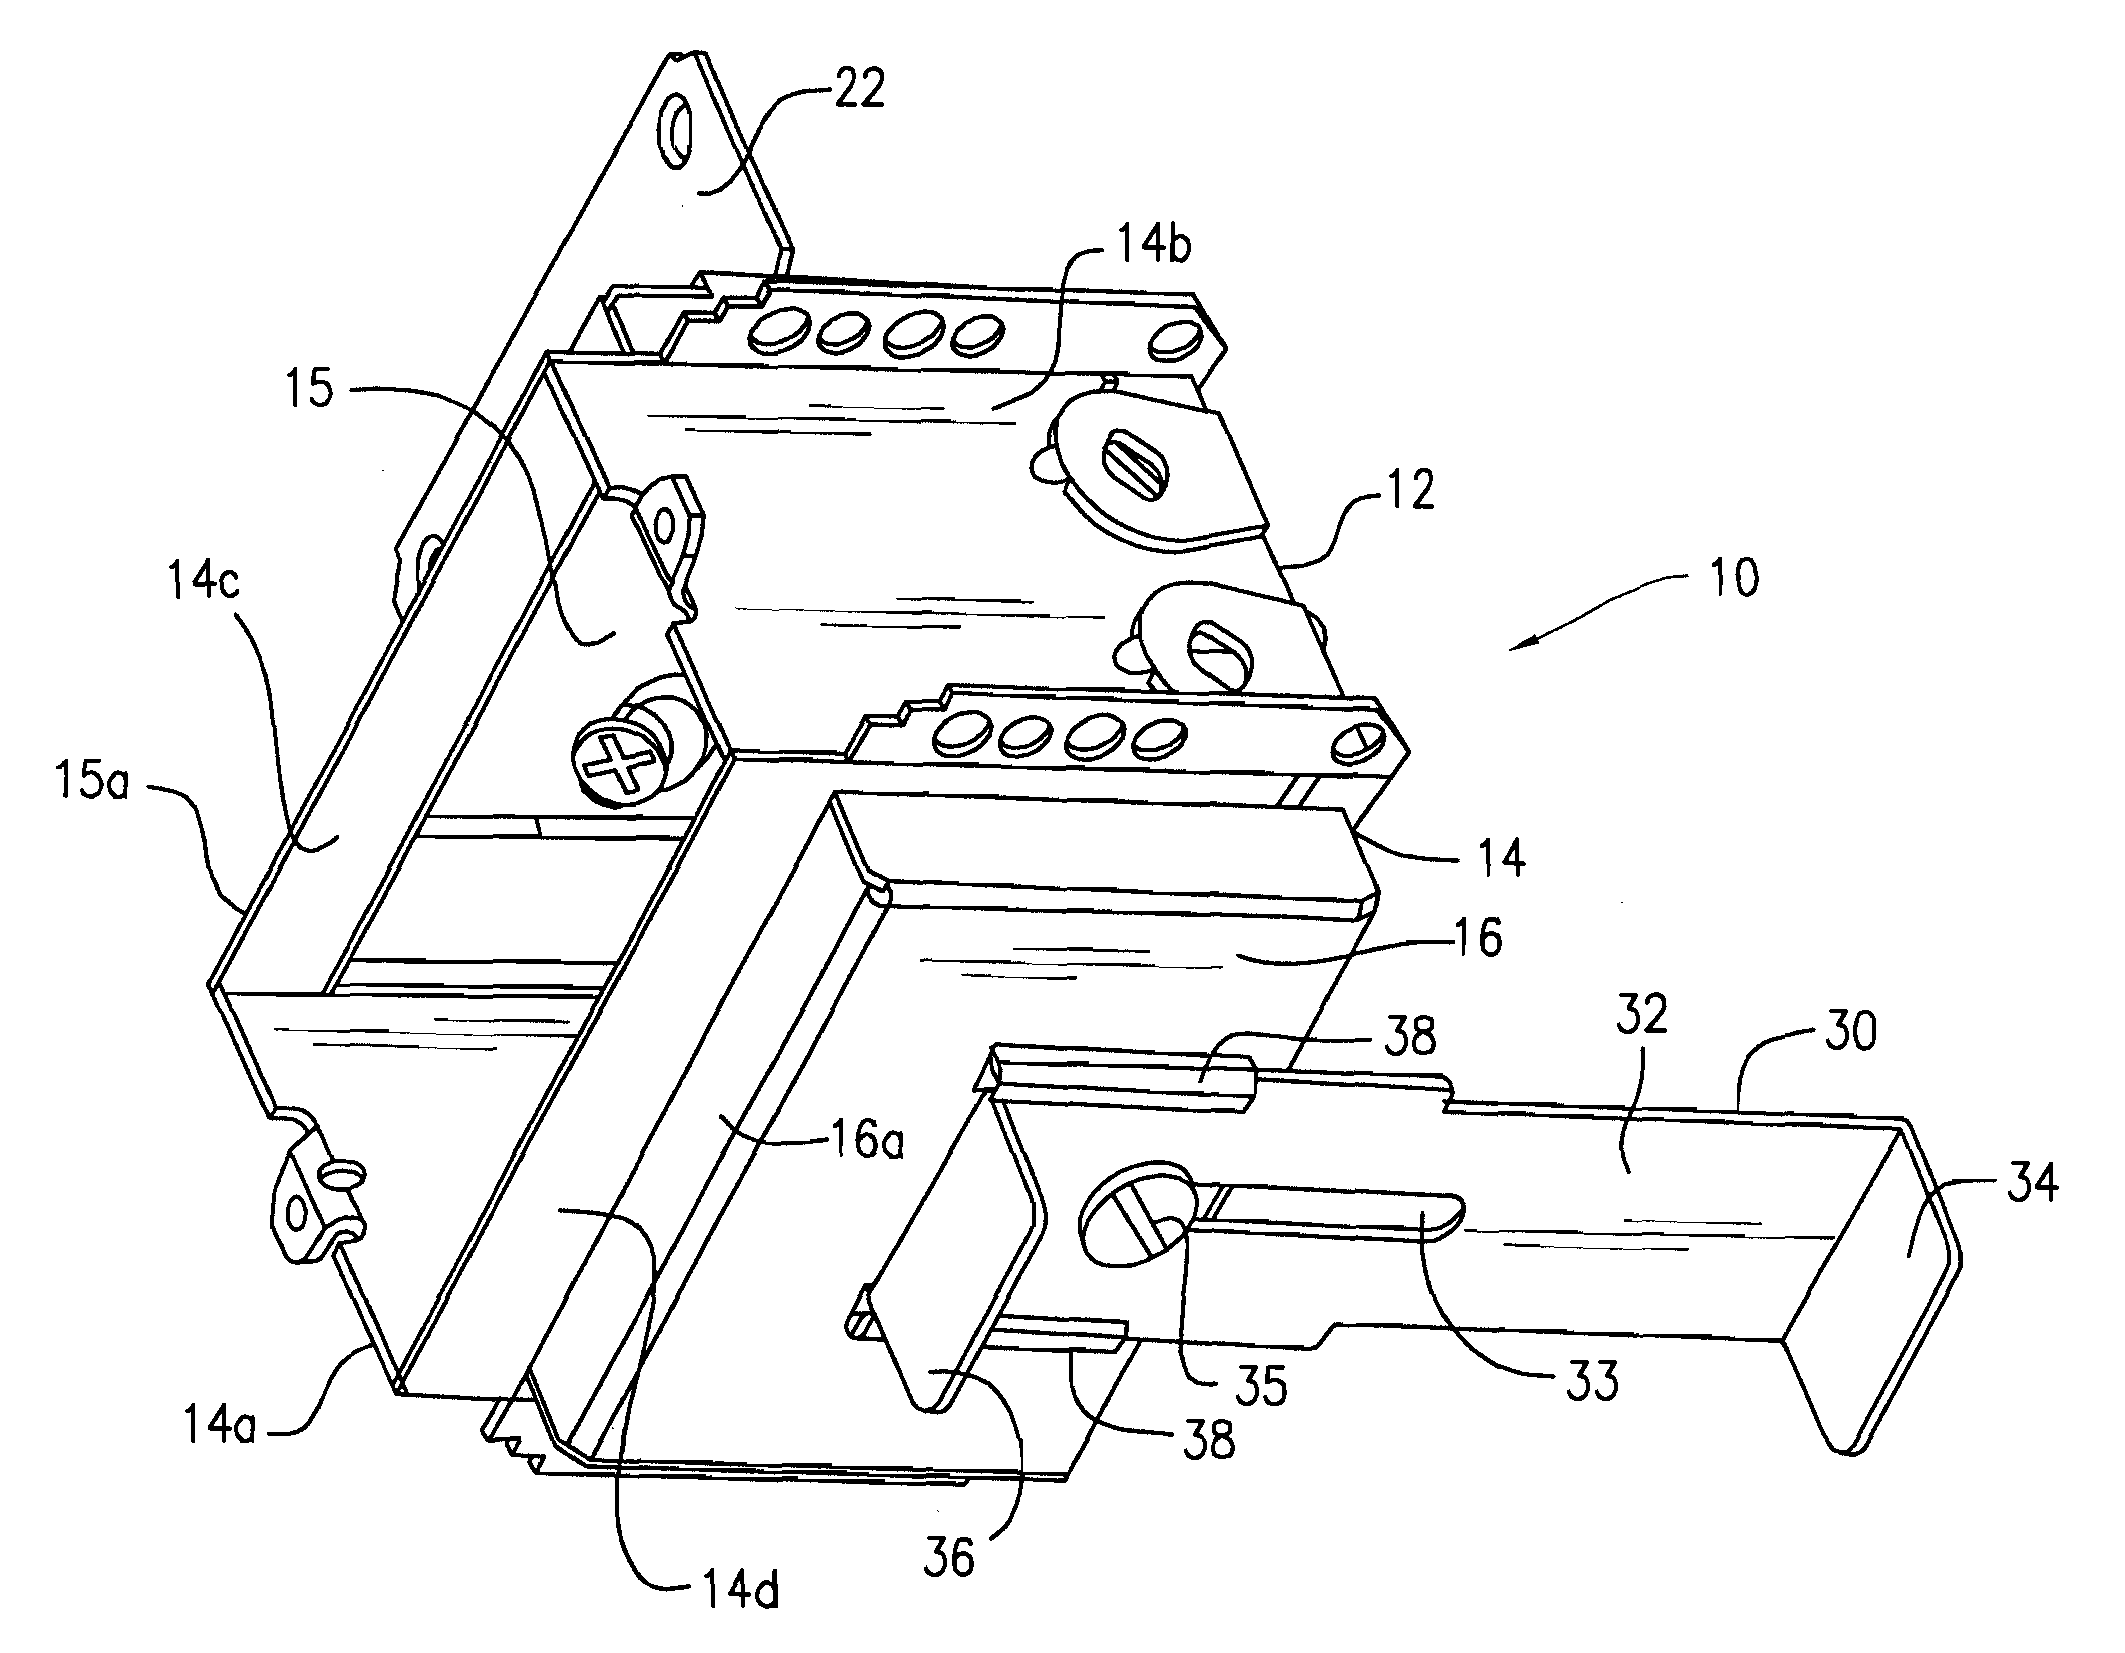 Electrical outlet box assembly for adjustable positioning with respect to a stud